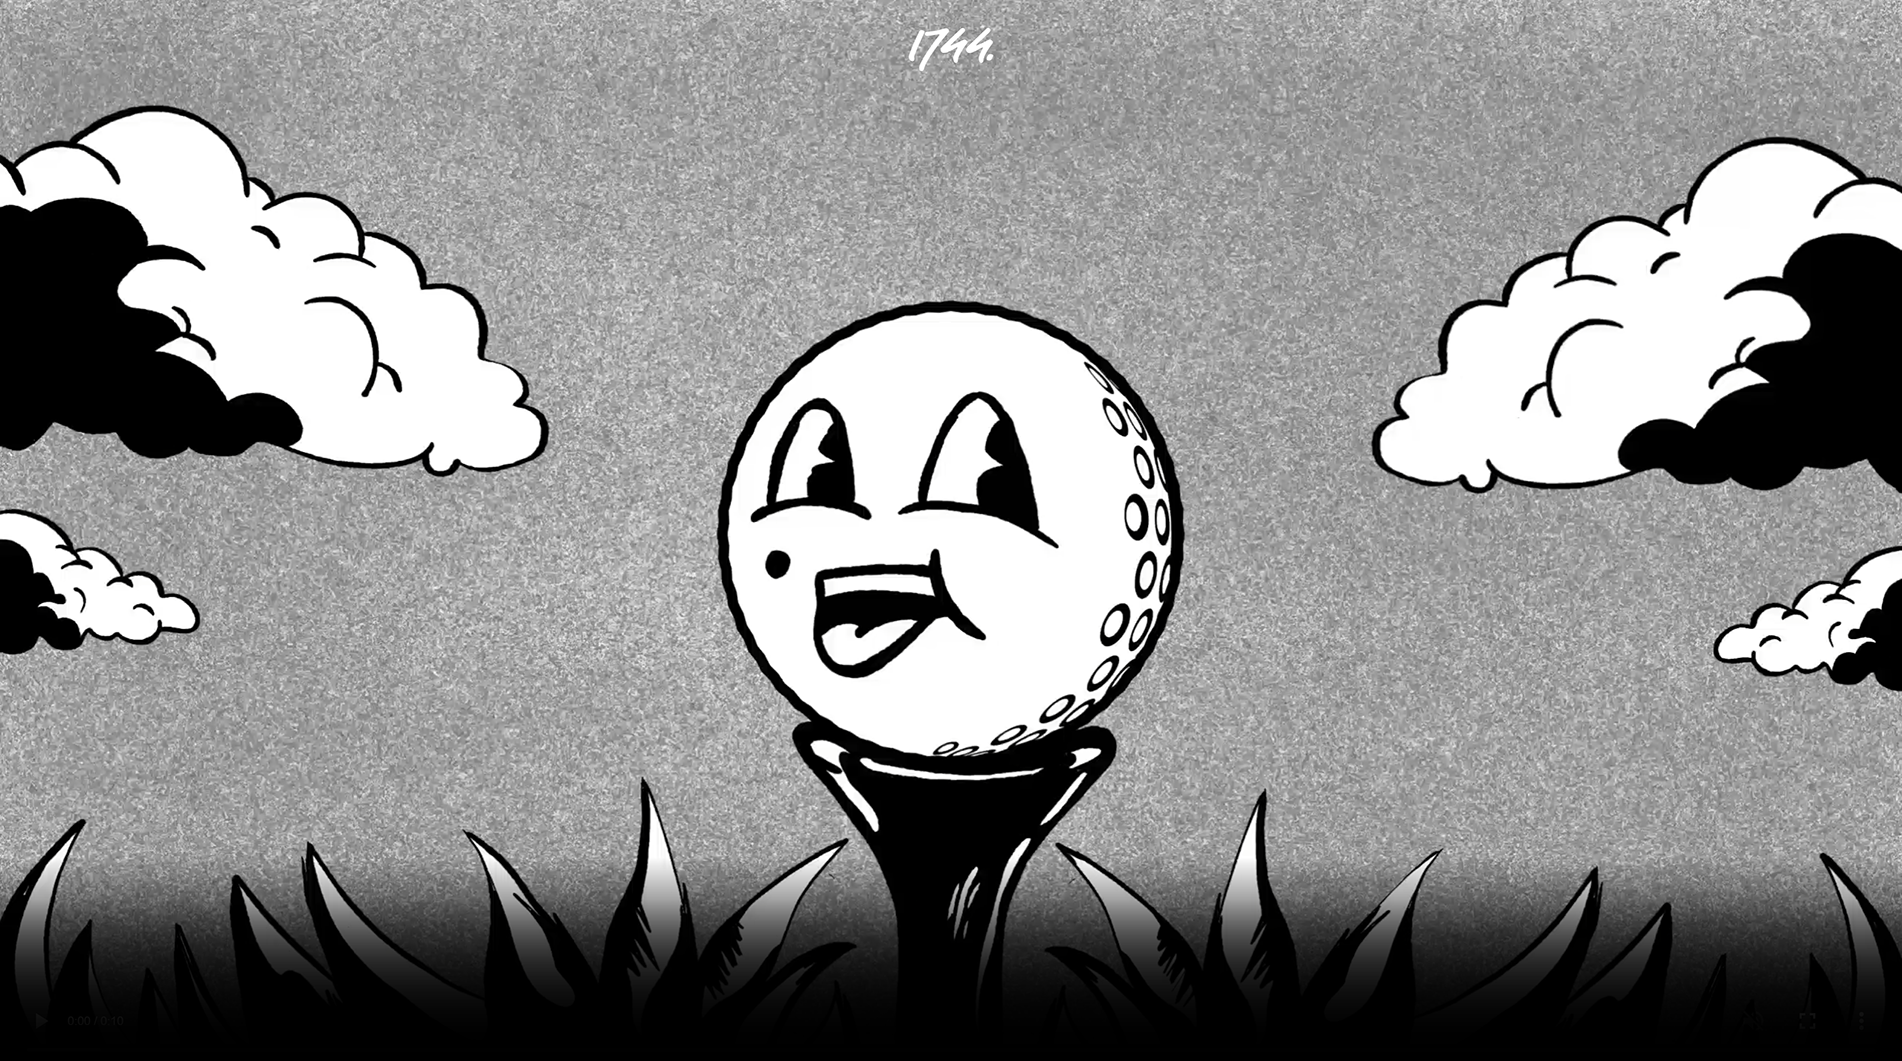 Golf ball cartoon showing a hole in one off the tee.